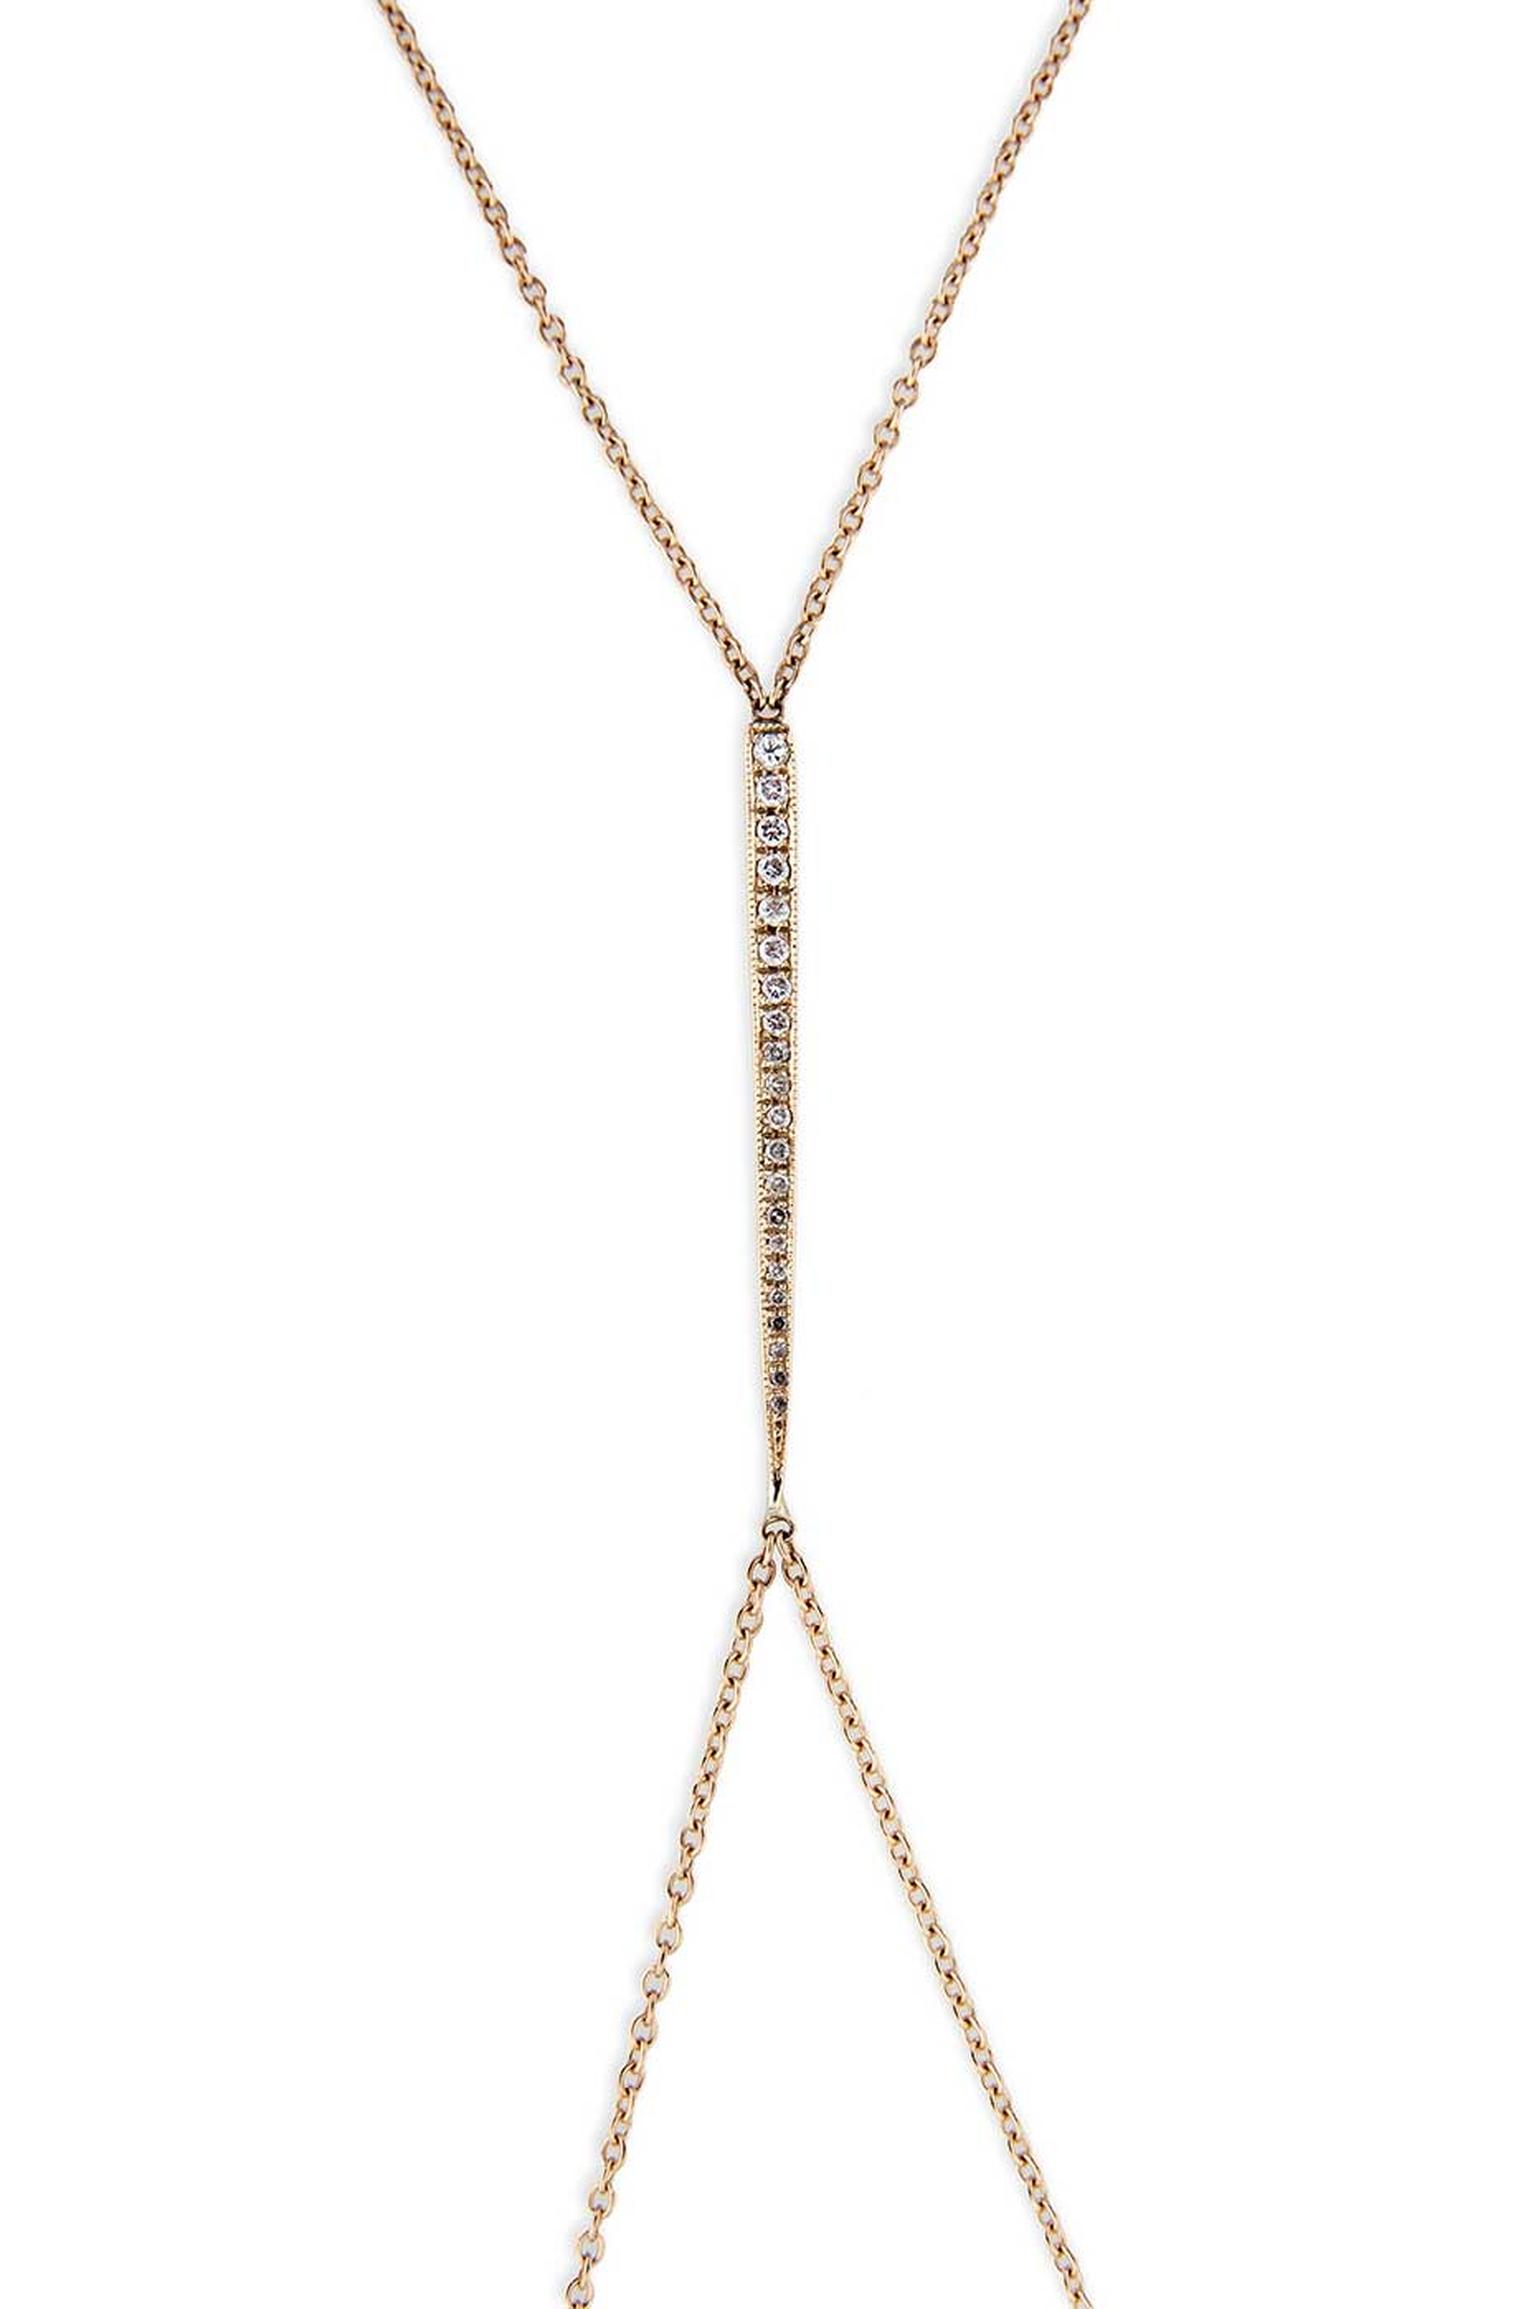 LA-based designer Jacquie Aiche also has a range of body jewels that she will be unveiling at the Couture Show Las Vegas, including this yellow gold pavé diamond Icepick design